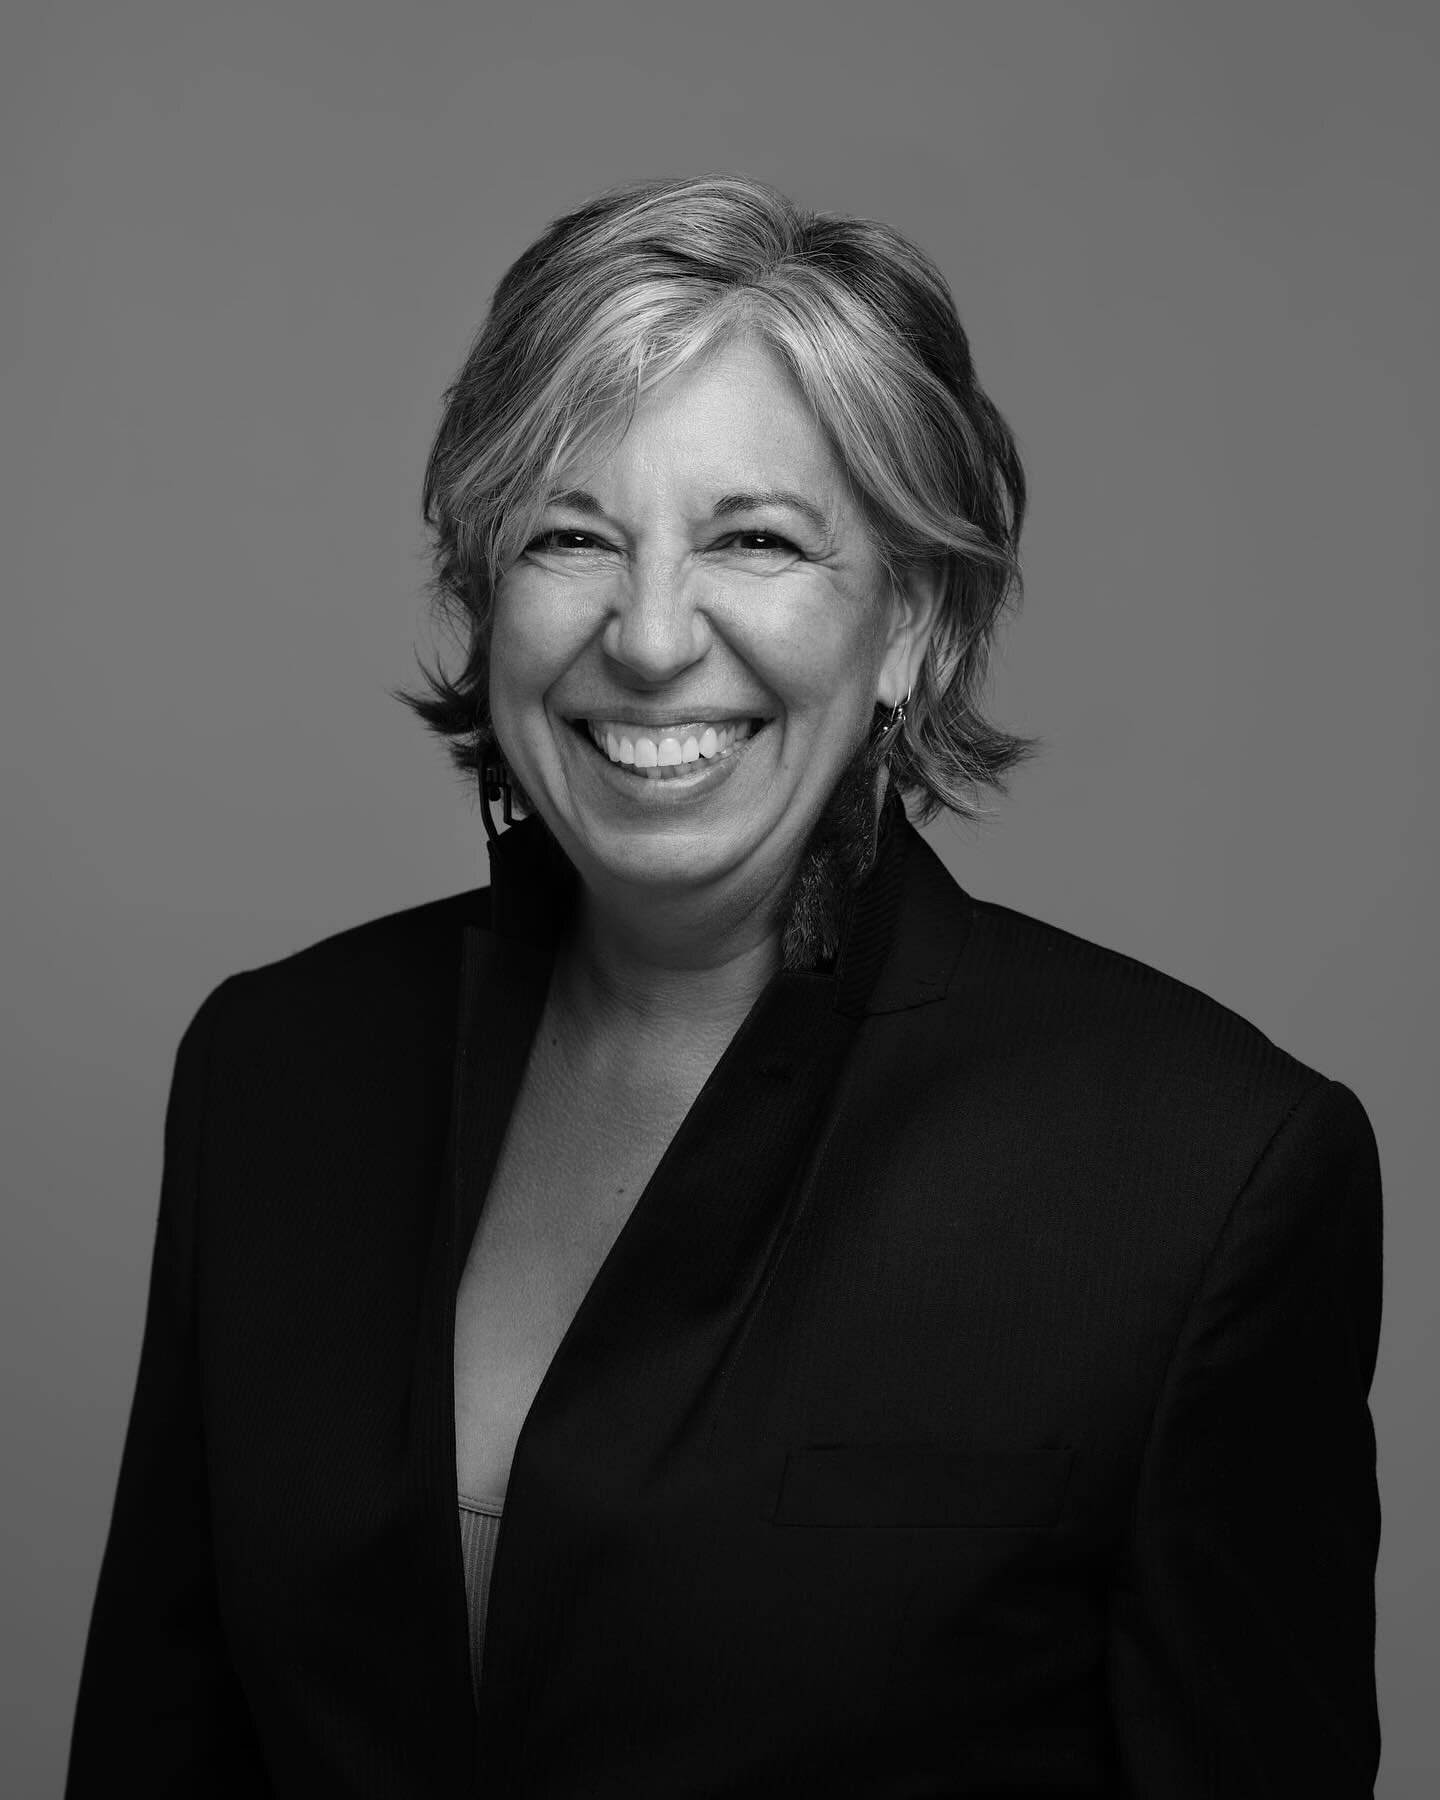 Meet our team!

Tonia Weber
Pattern Making Teacher 

With over 25 years entrenched in the fashion industry, I bring a wealth of experience. My journey includes owning and operating a thriving Canadian retail business. In my role as a lead designer, I